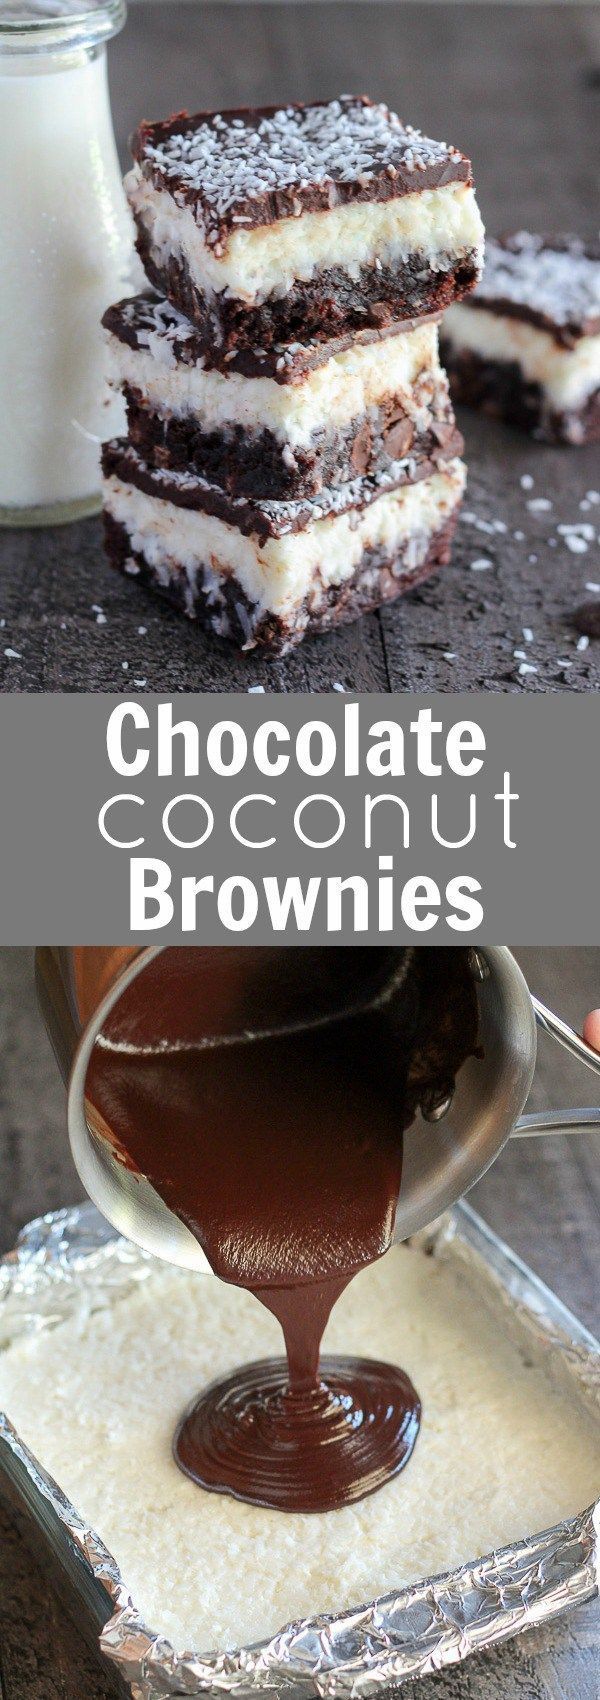 Chocolate Coconut Brownies – Fudgy brownies topped with a layer of creamy sweet coconut, and finished